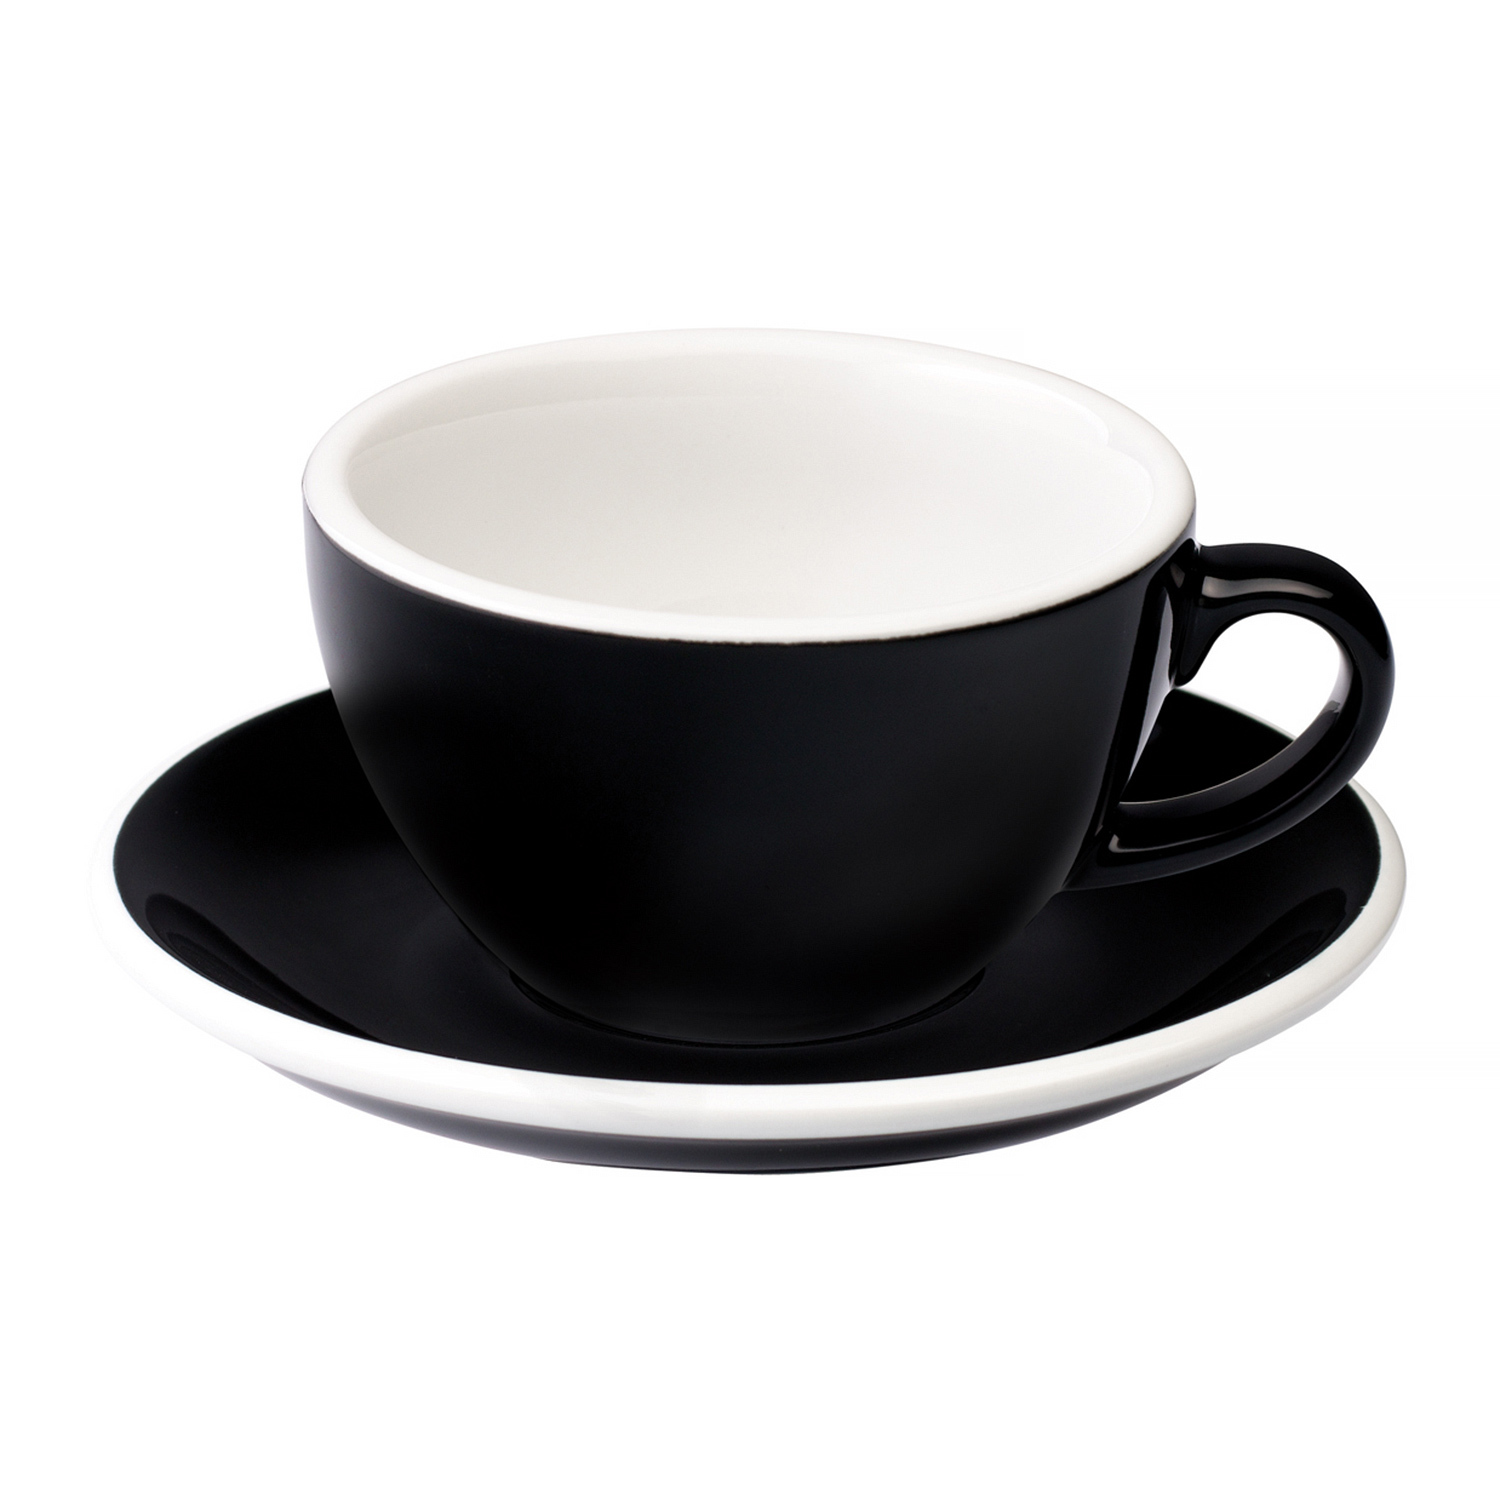 Loveramics Egg - Cappuccino 200 ml Cup and Saucer  - Black